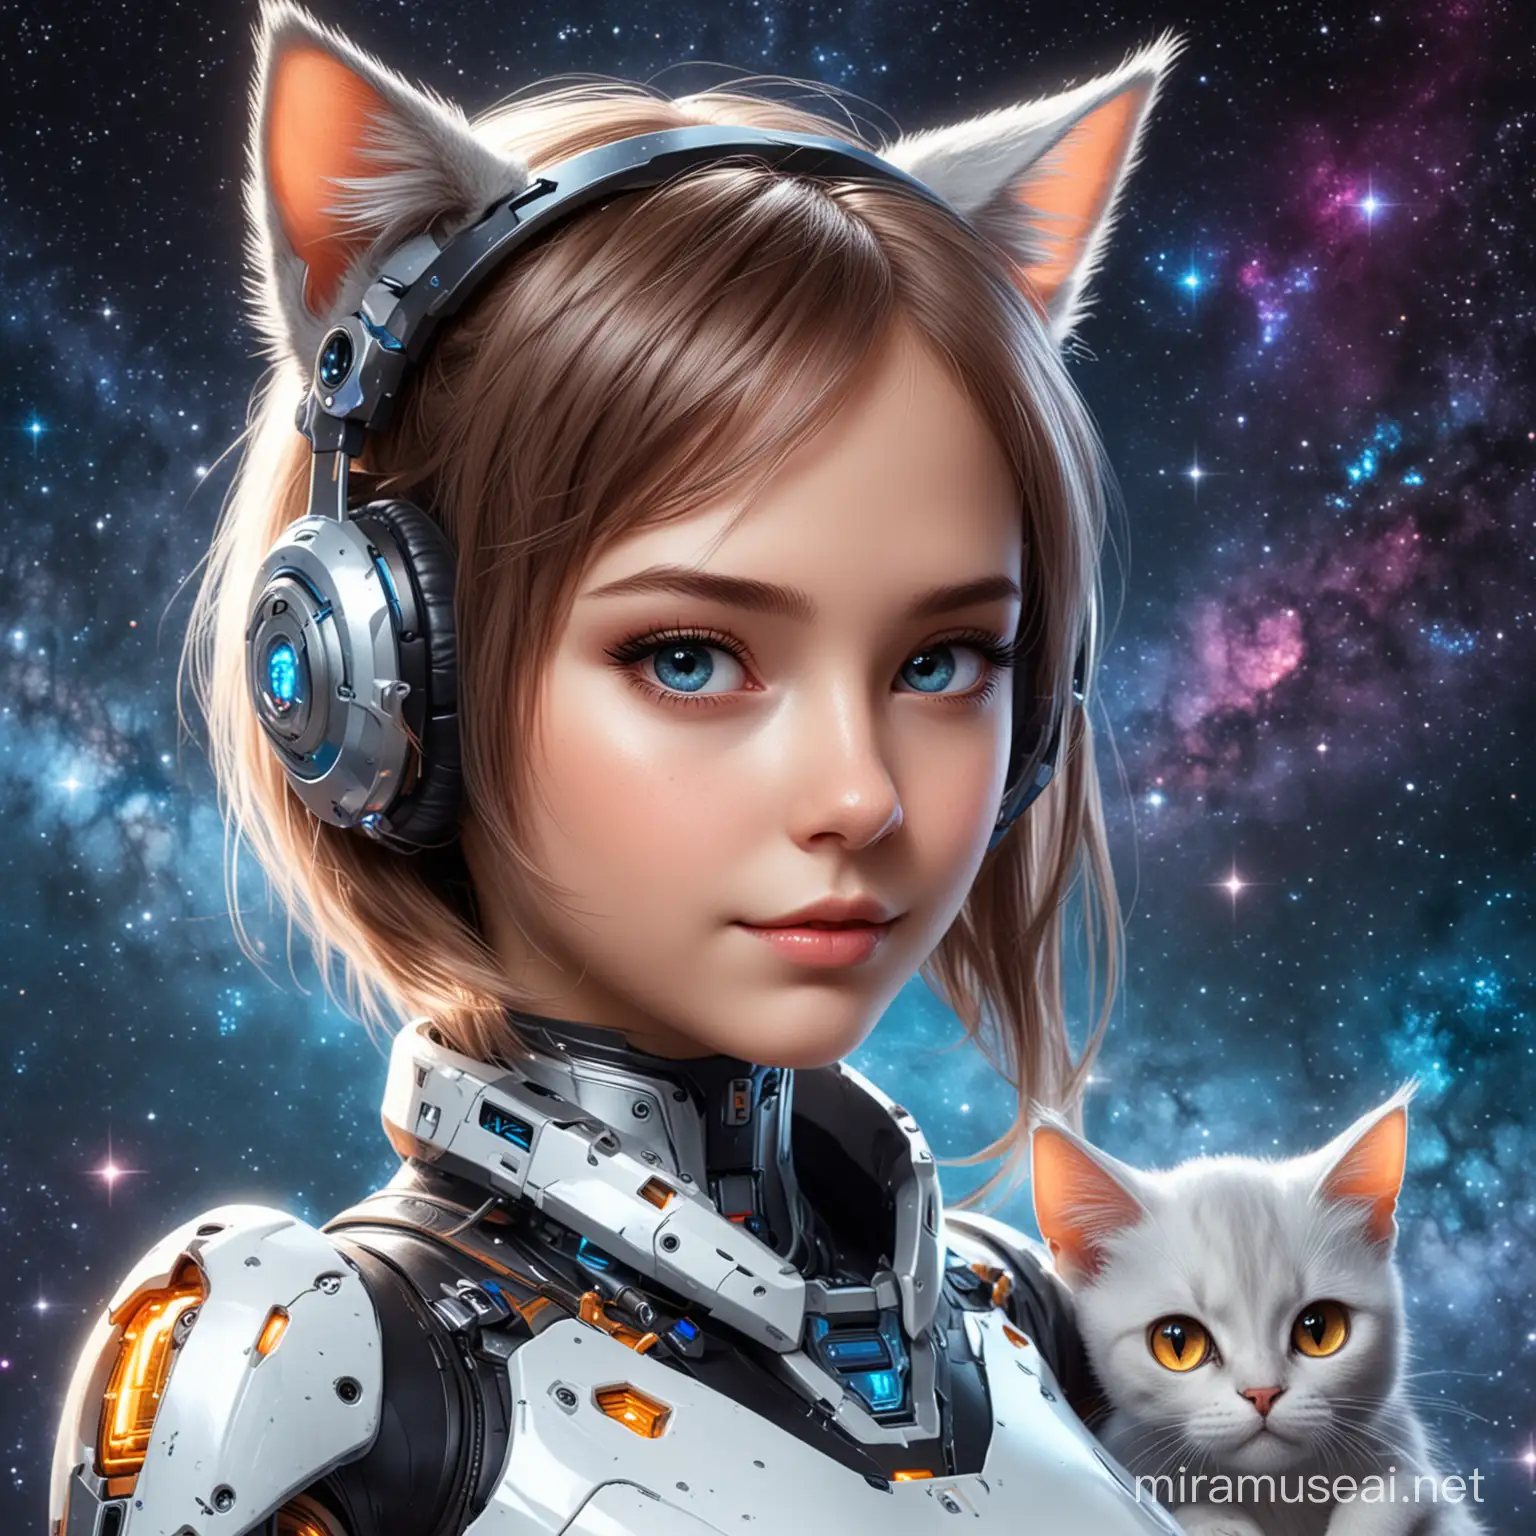 Futuristic Robochick with Cat Ear in Cosmic Setting